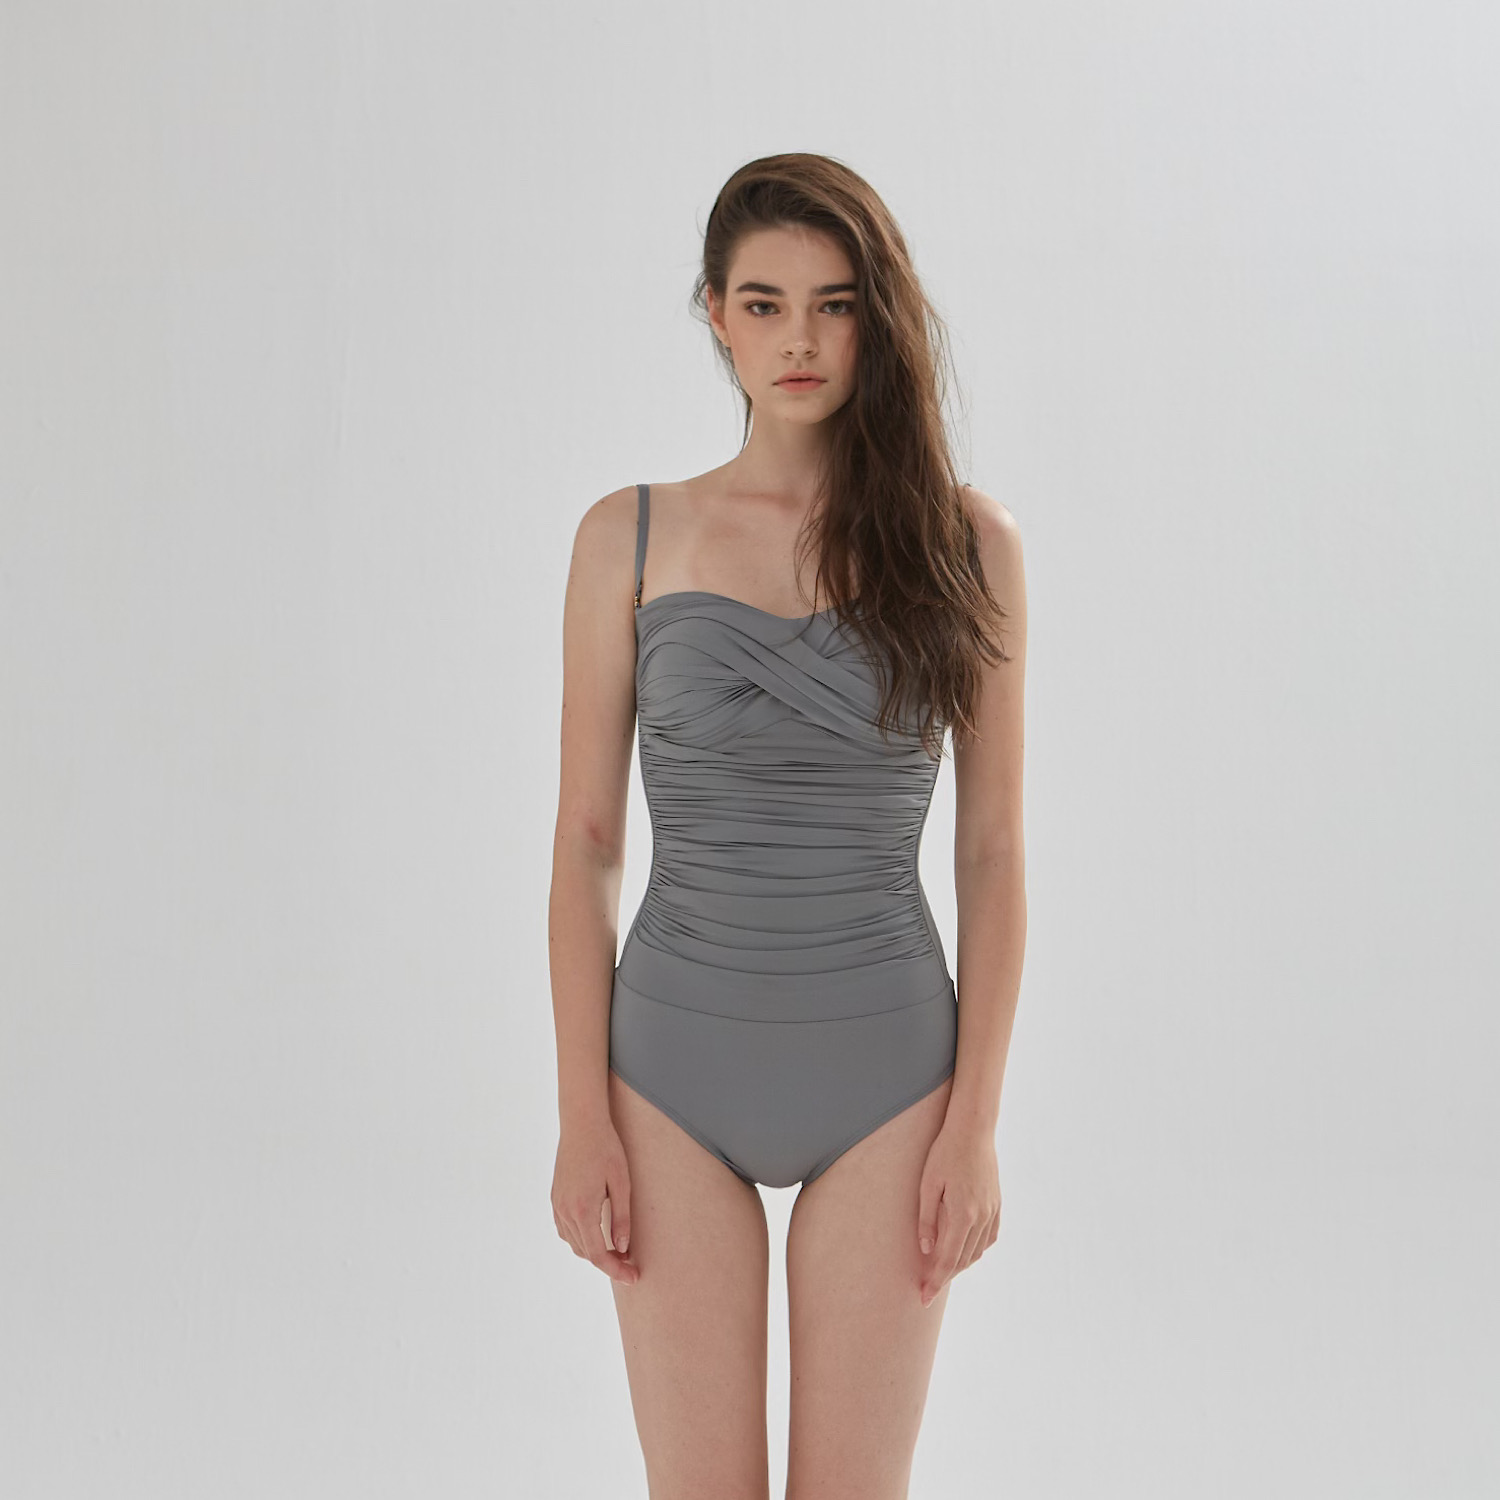 Corset One-Piece Dress Swimming Suit (Gray)